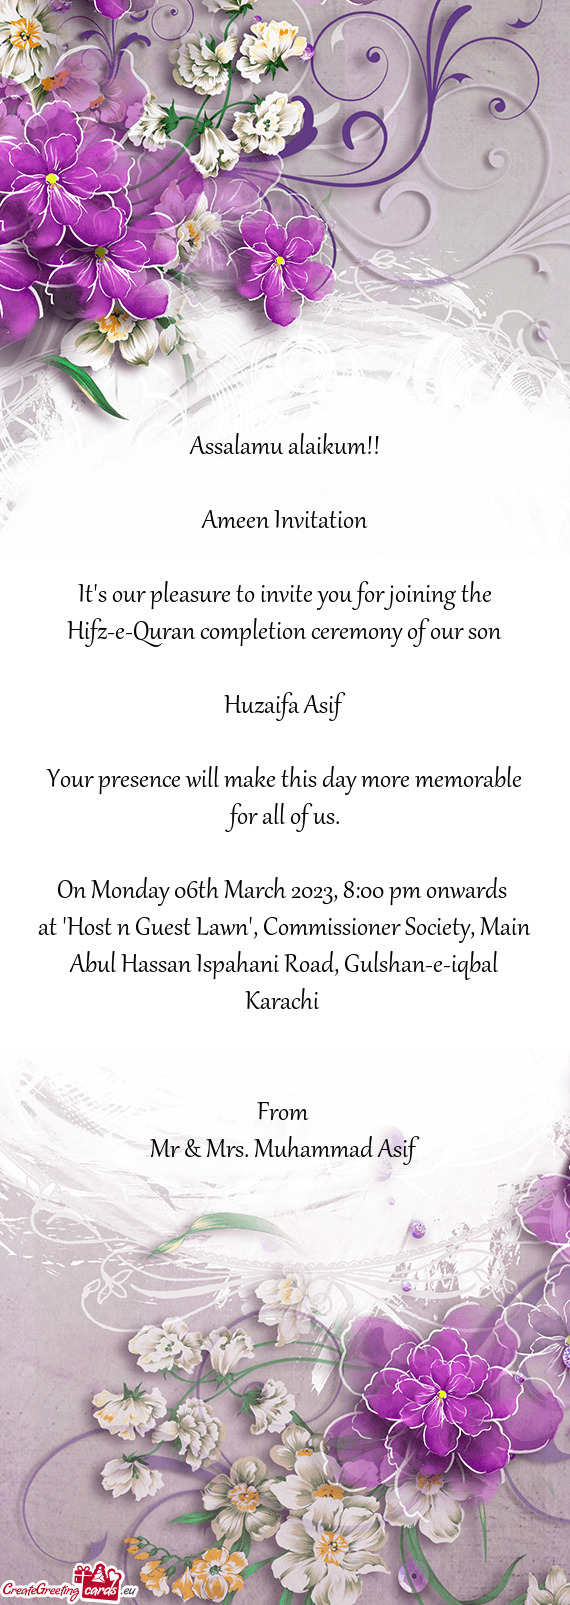 It's our pleasure to invite you for joining the Hifz-e-Quran completion ceremony of our son